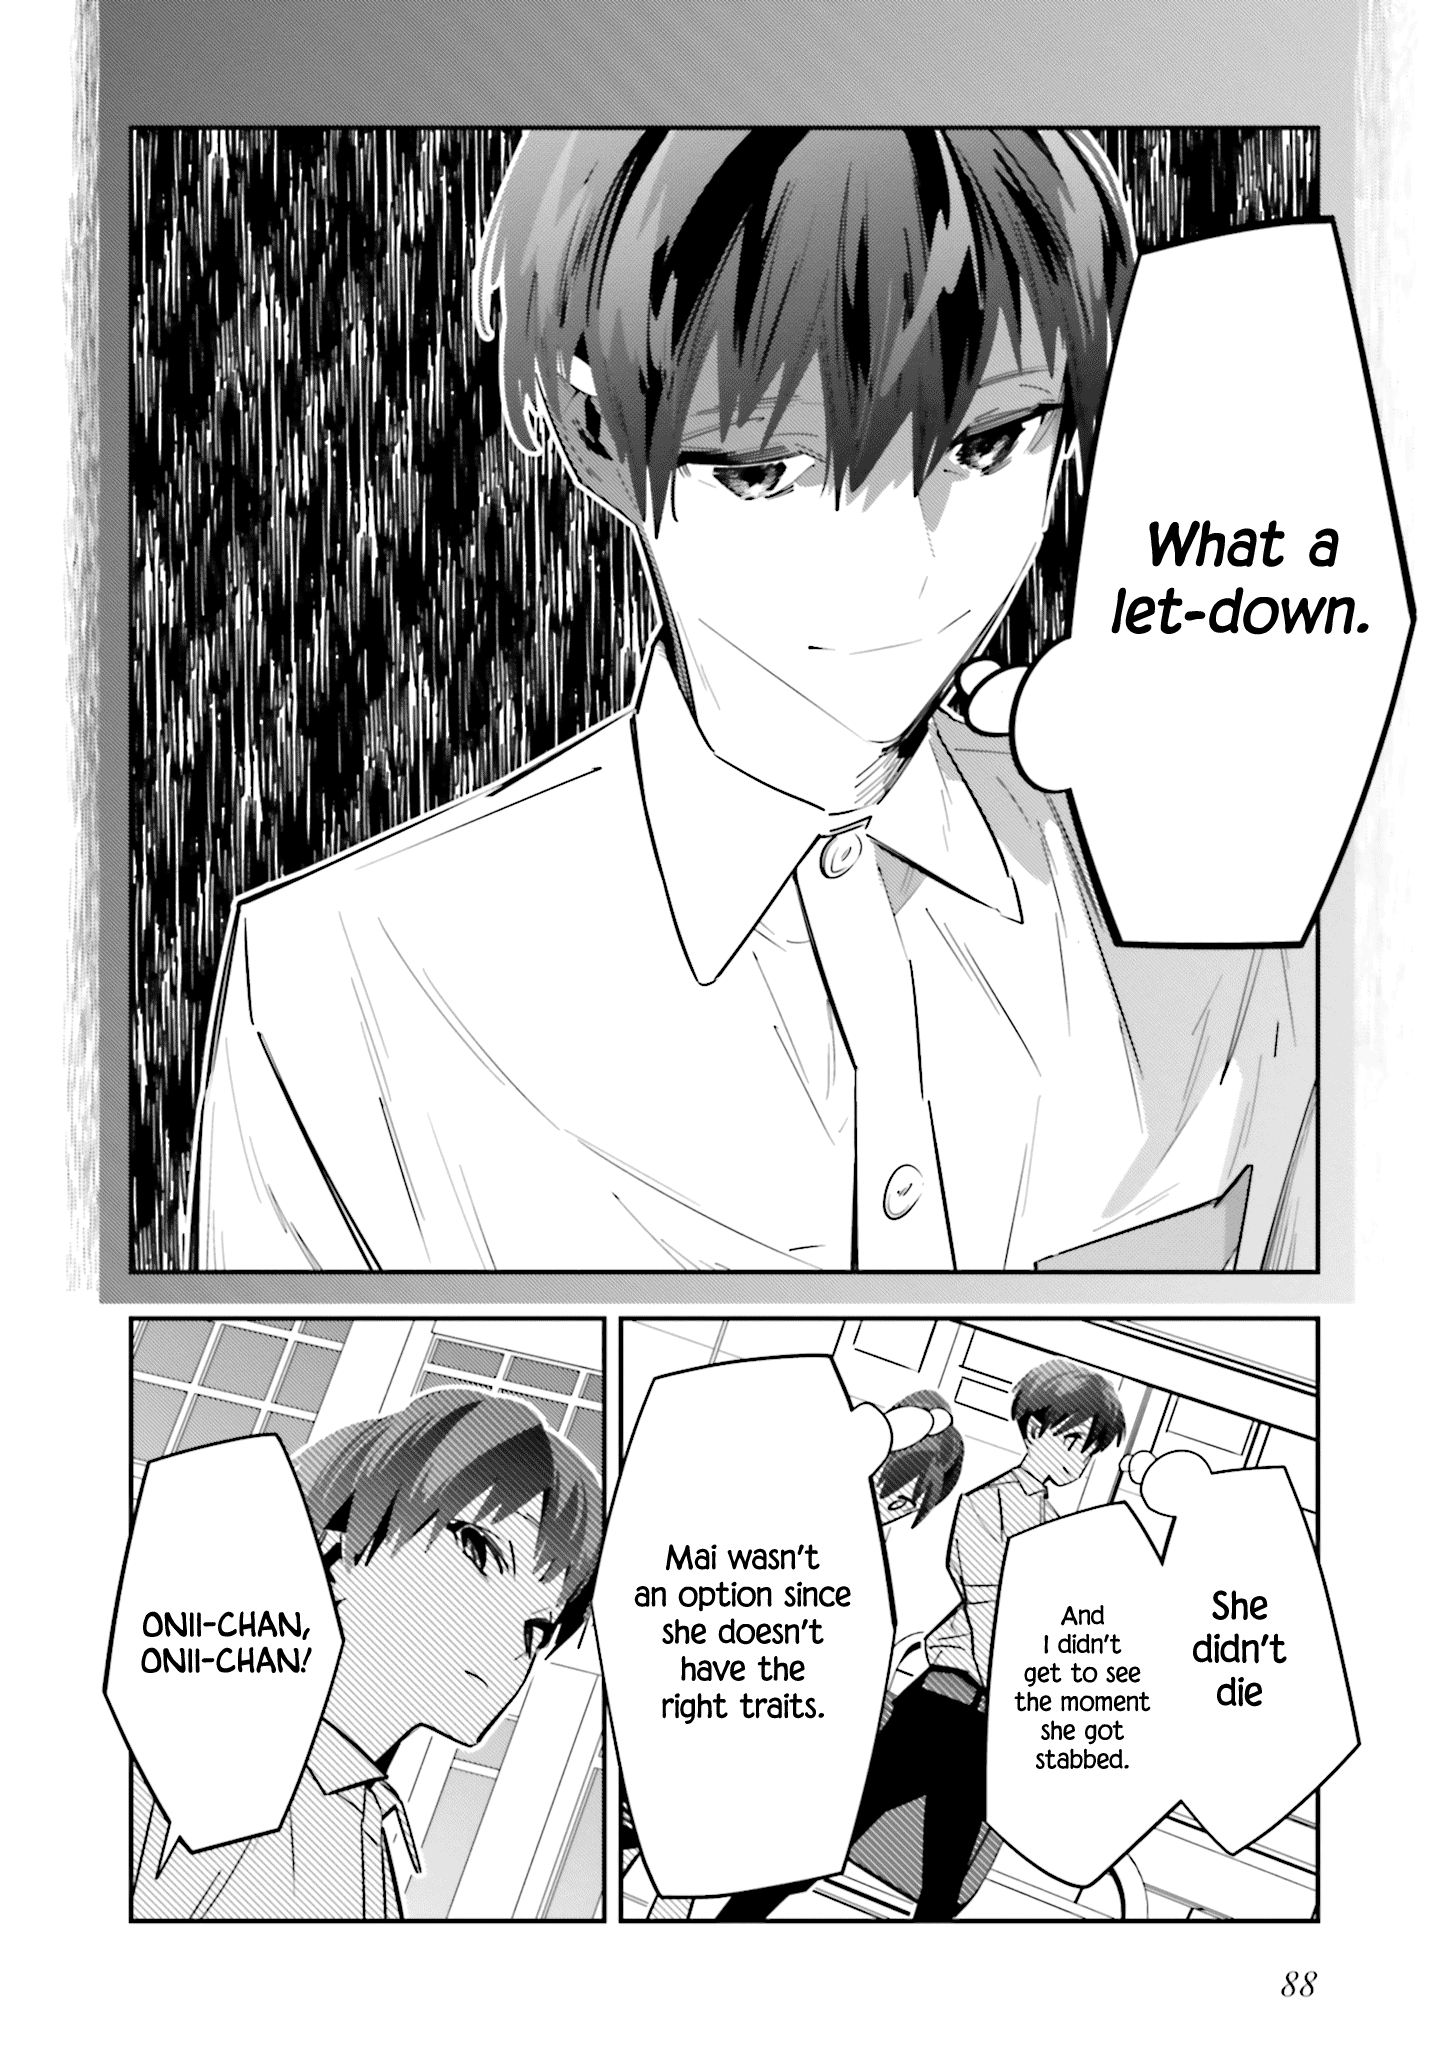 I Reincarnated As The Little Sister Of A Death Game Manga's Murder Mastermind And Failed Chapter 2 #35